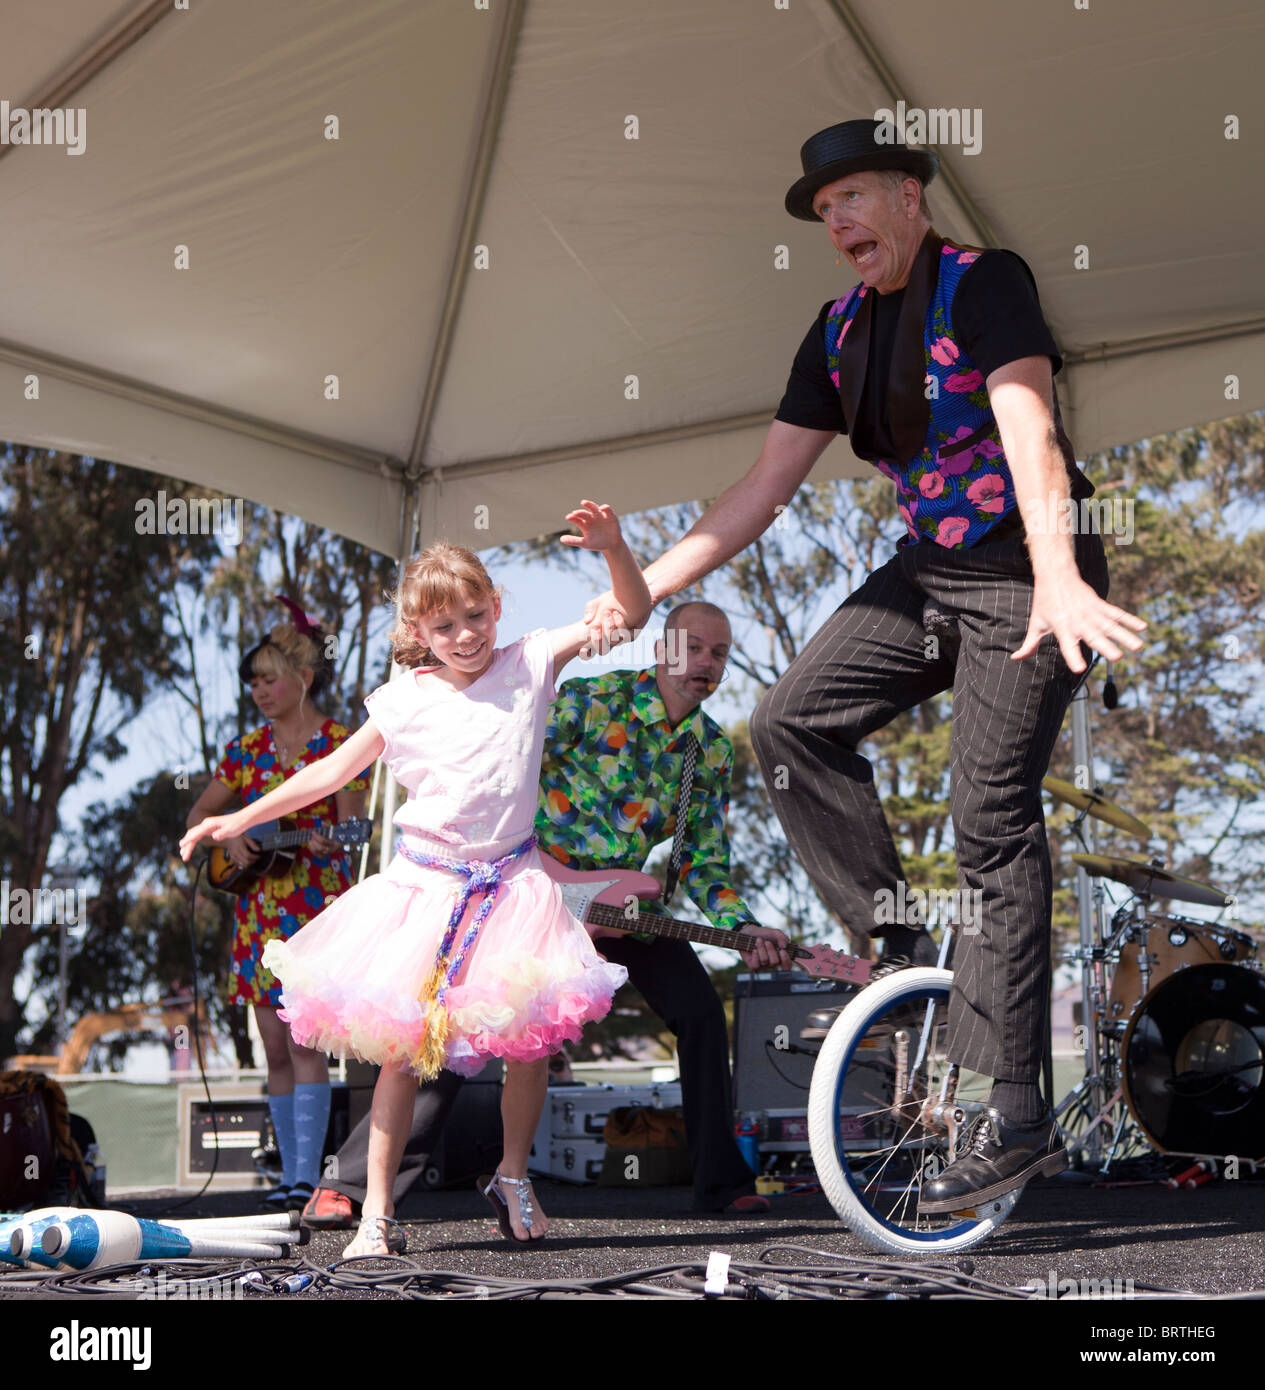 A man rides a unicycle with the help of a little girl at an outdoor music festival Stock Photo